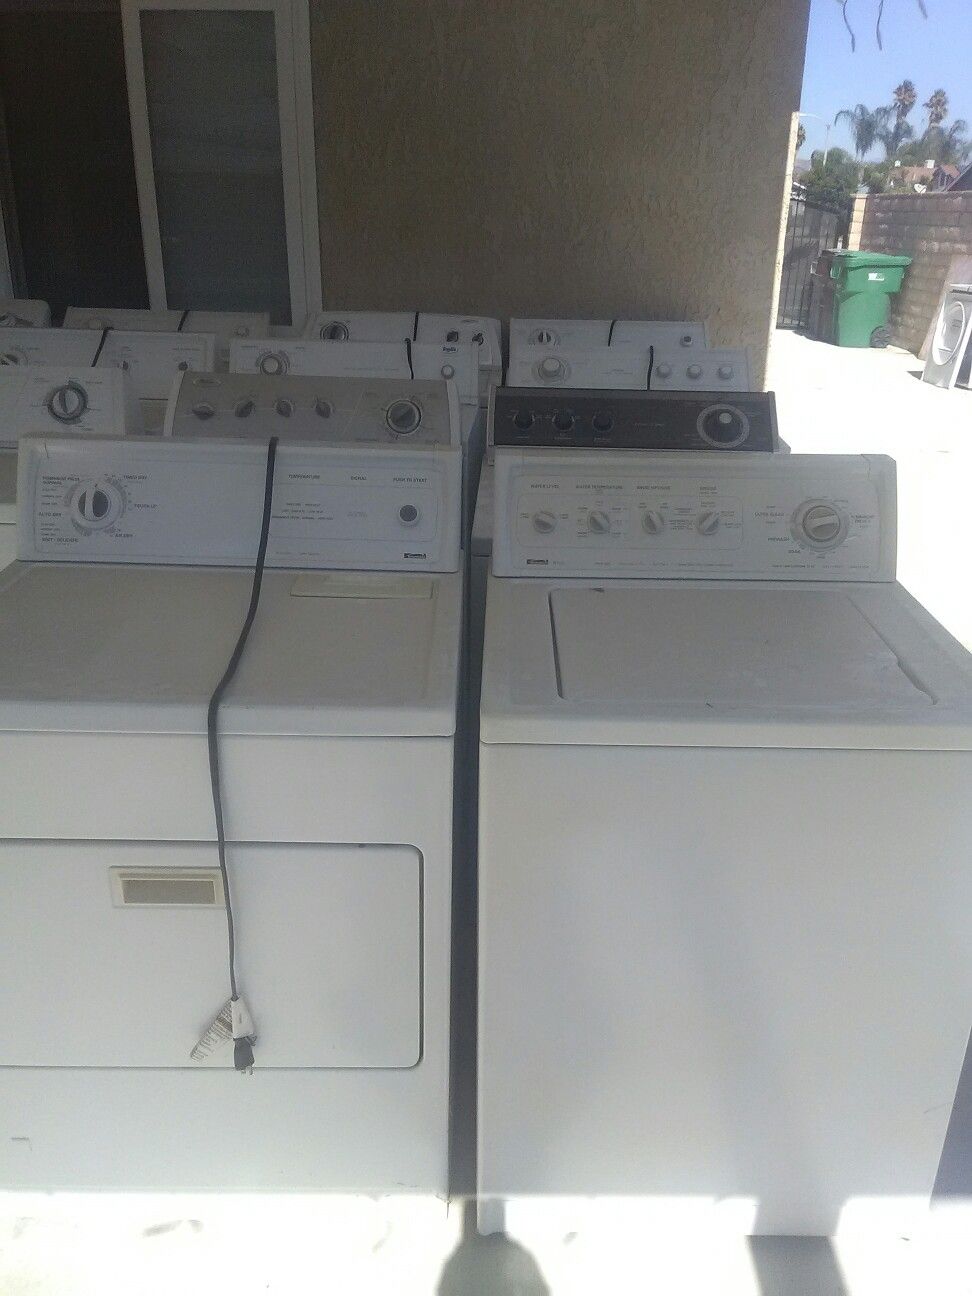 Kenmore/Whirlpool washer's and gas dryer's